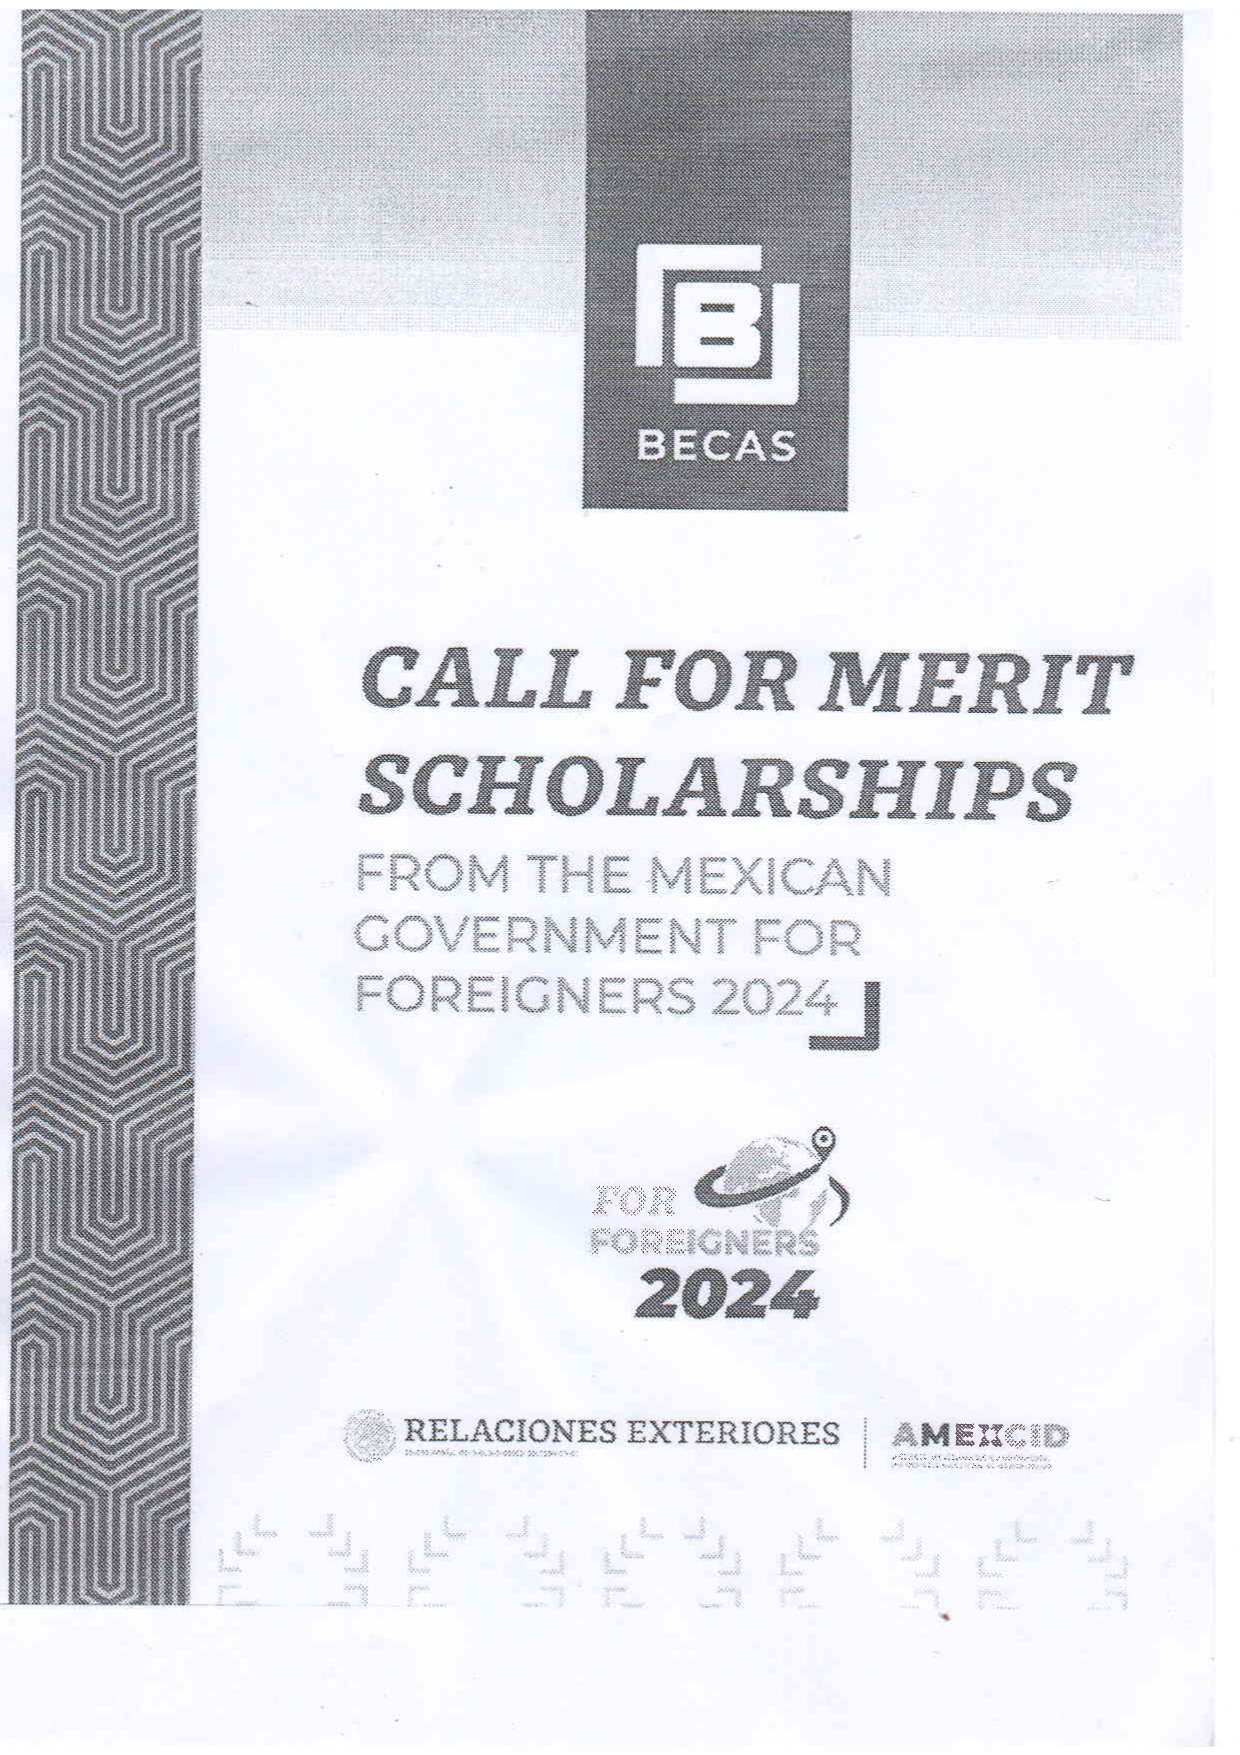 Mexican scholarship offer